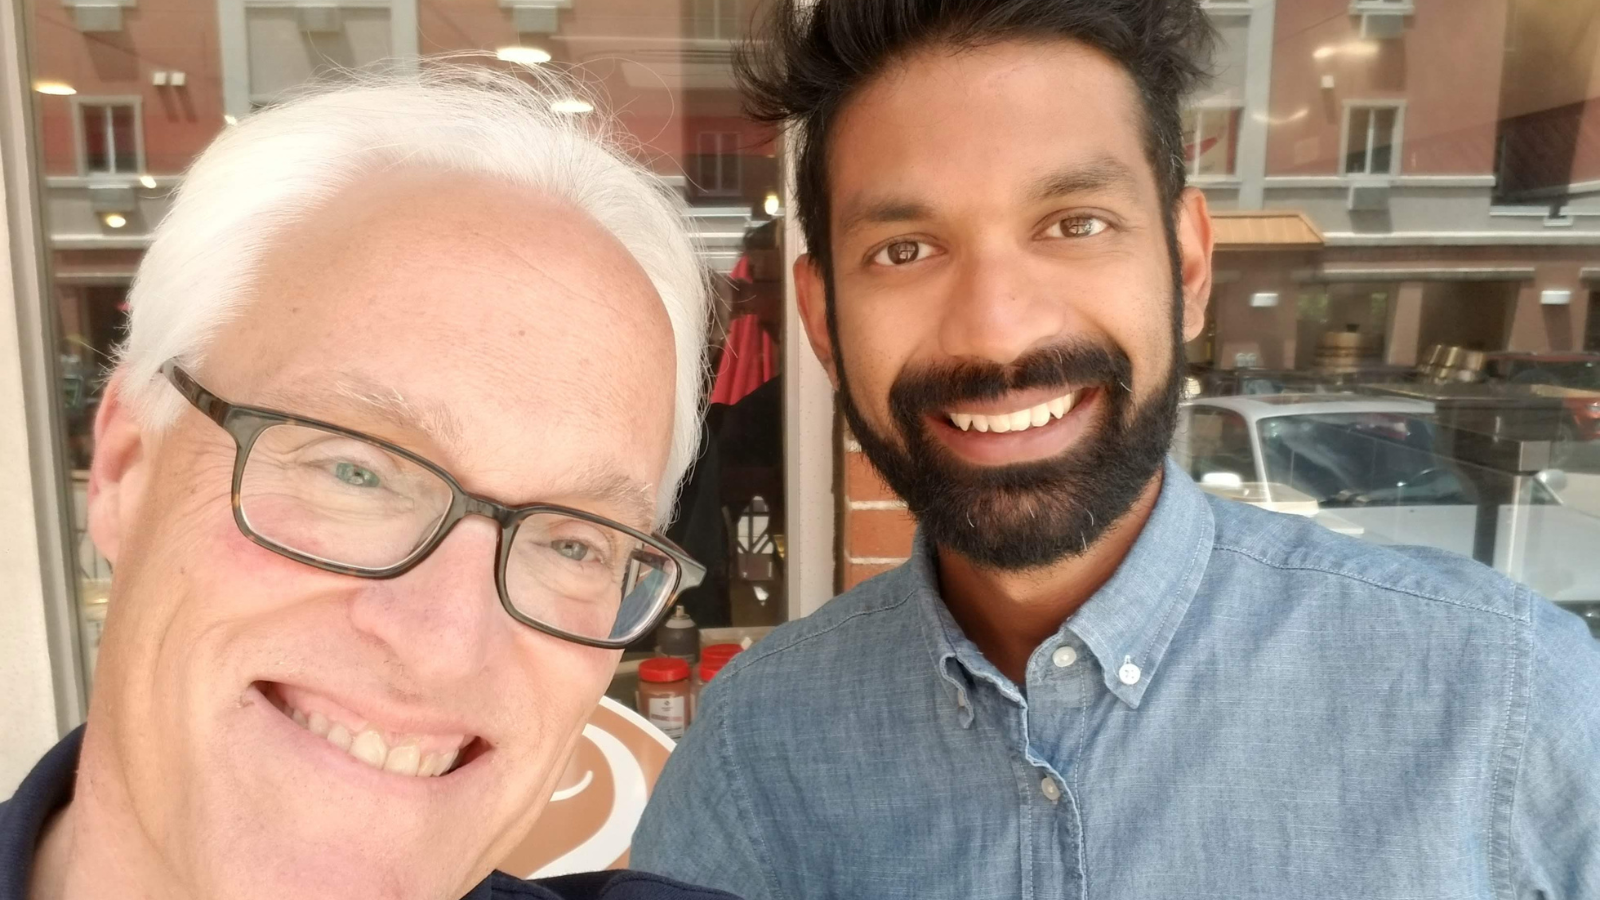 Photo caption: After eight months collaborating remotely, Jim and Darshan meet for the first time in State College, PA.